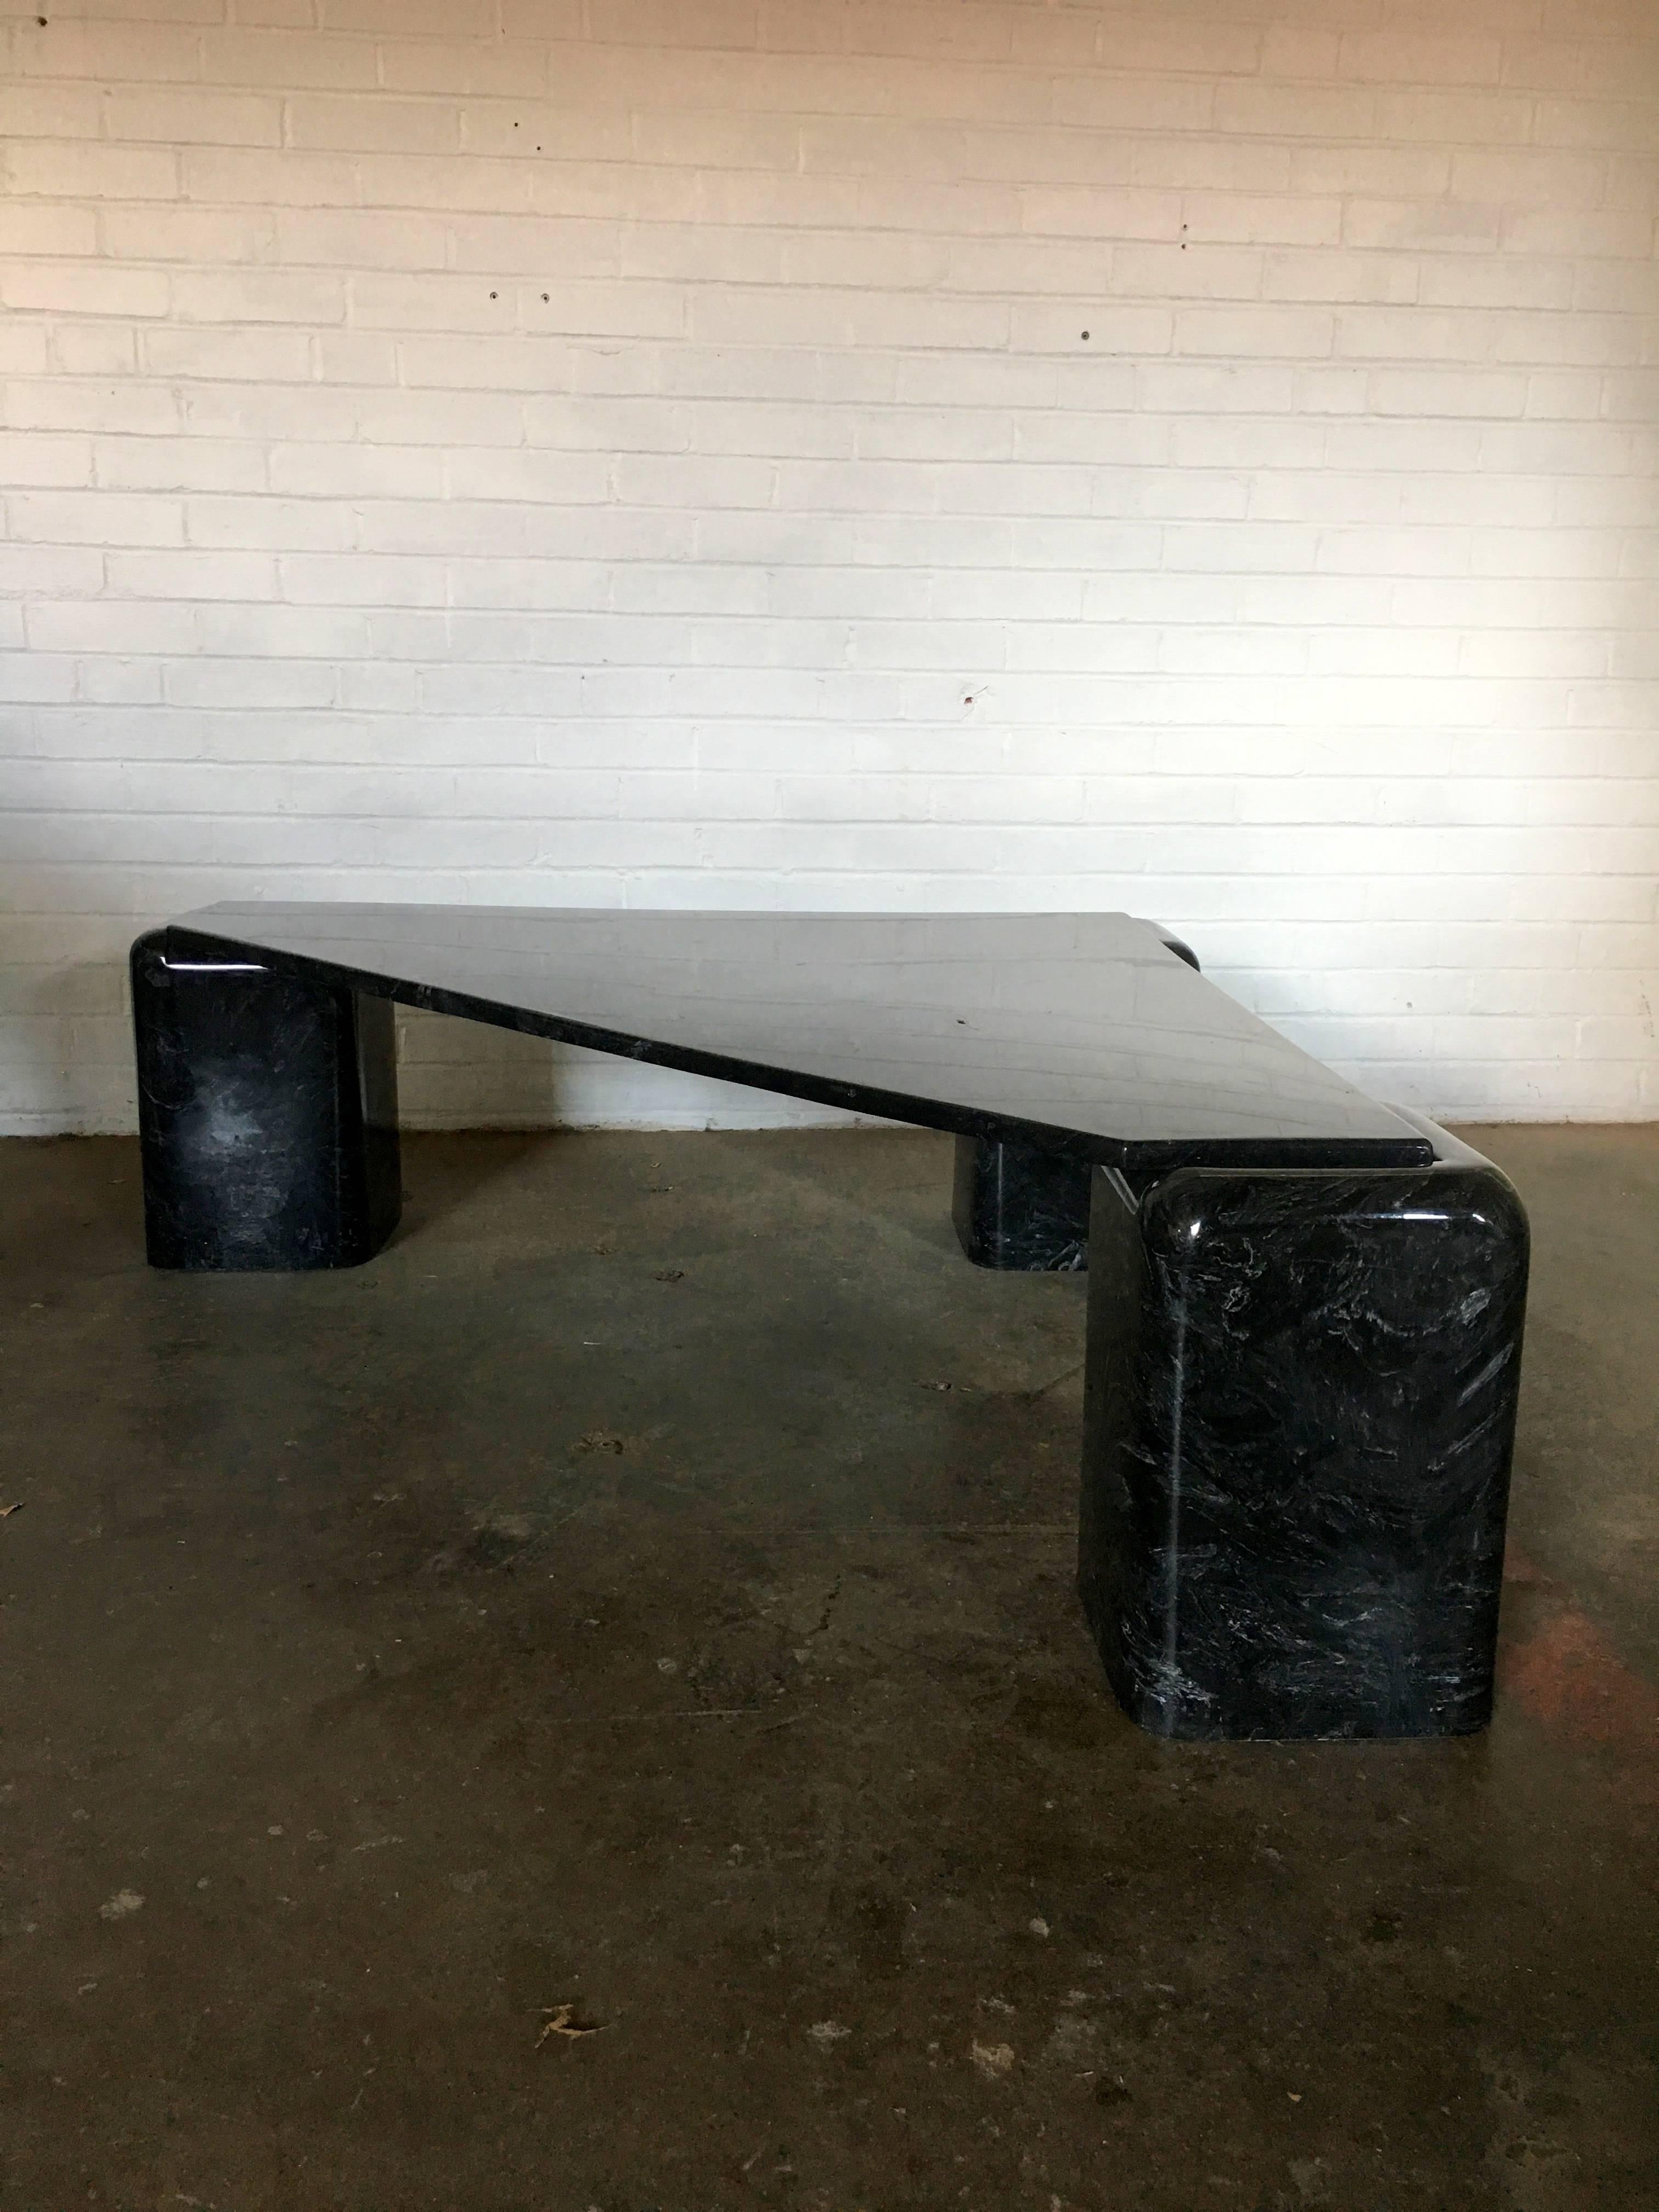 So proud to present to you this excellent condition back with white coffee or cocktail table. No chips or breaks anywhere! Only light scratches.
Table is supported by three bases of the same marble.
The table top sits nicely onto the bases and is